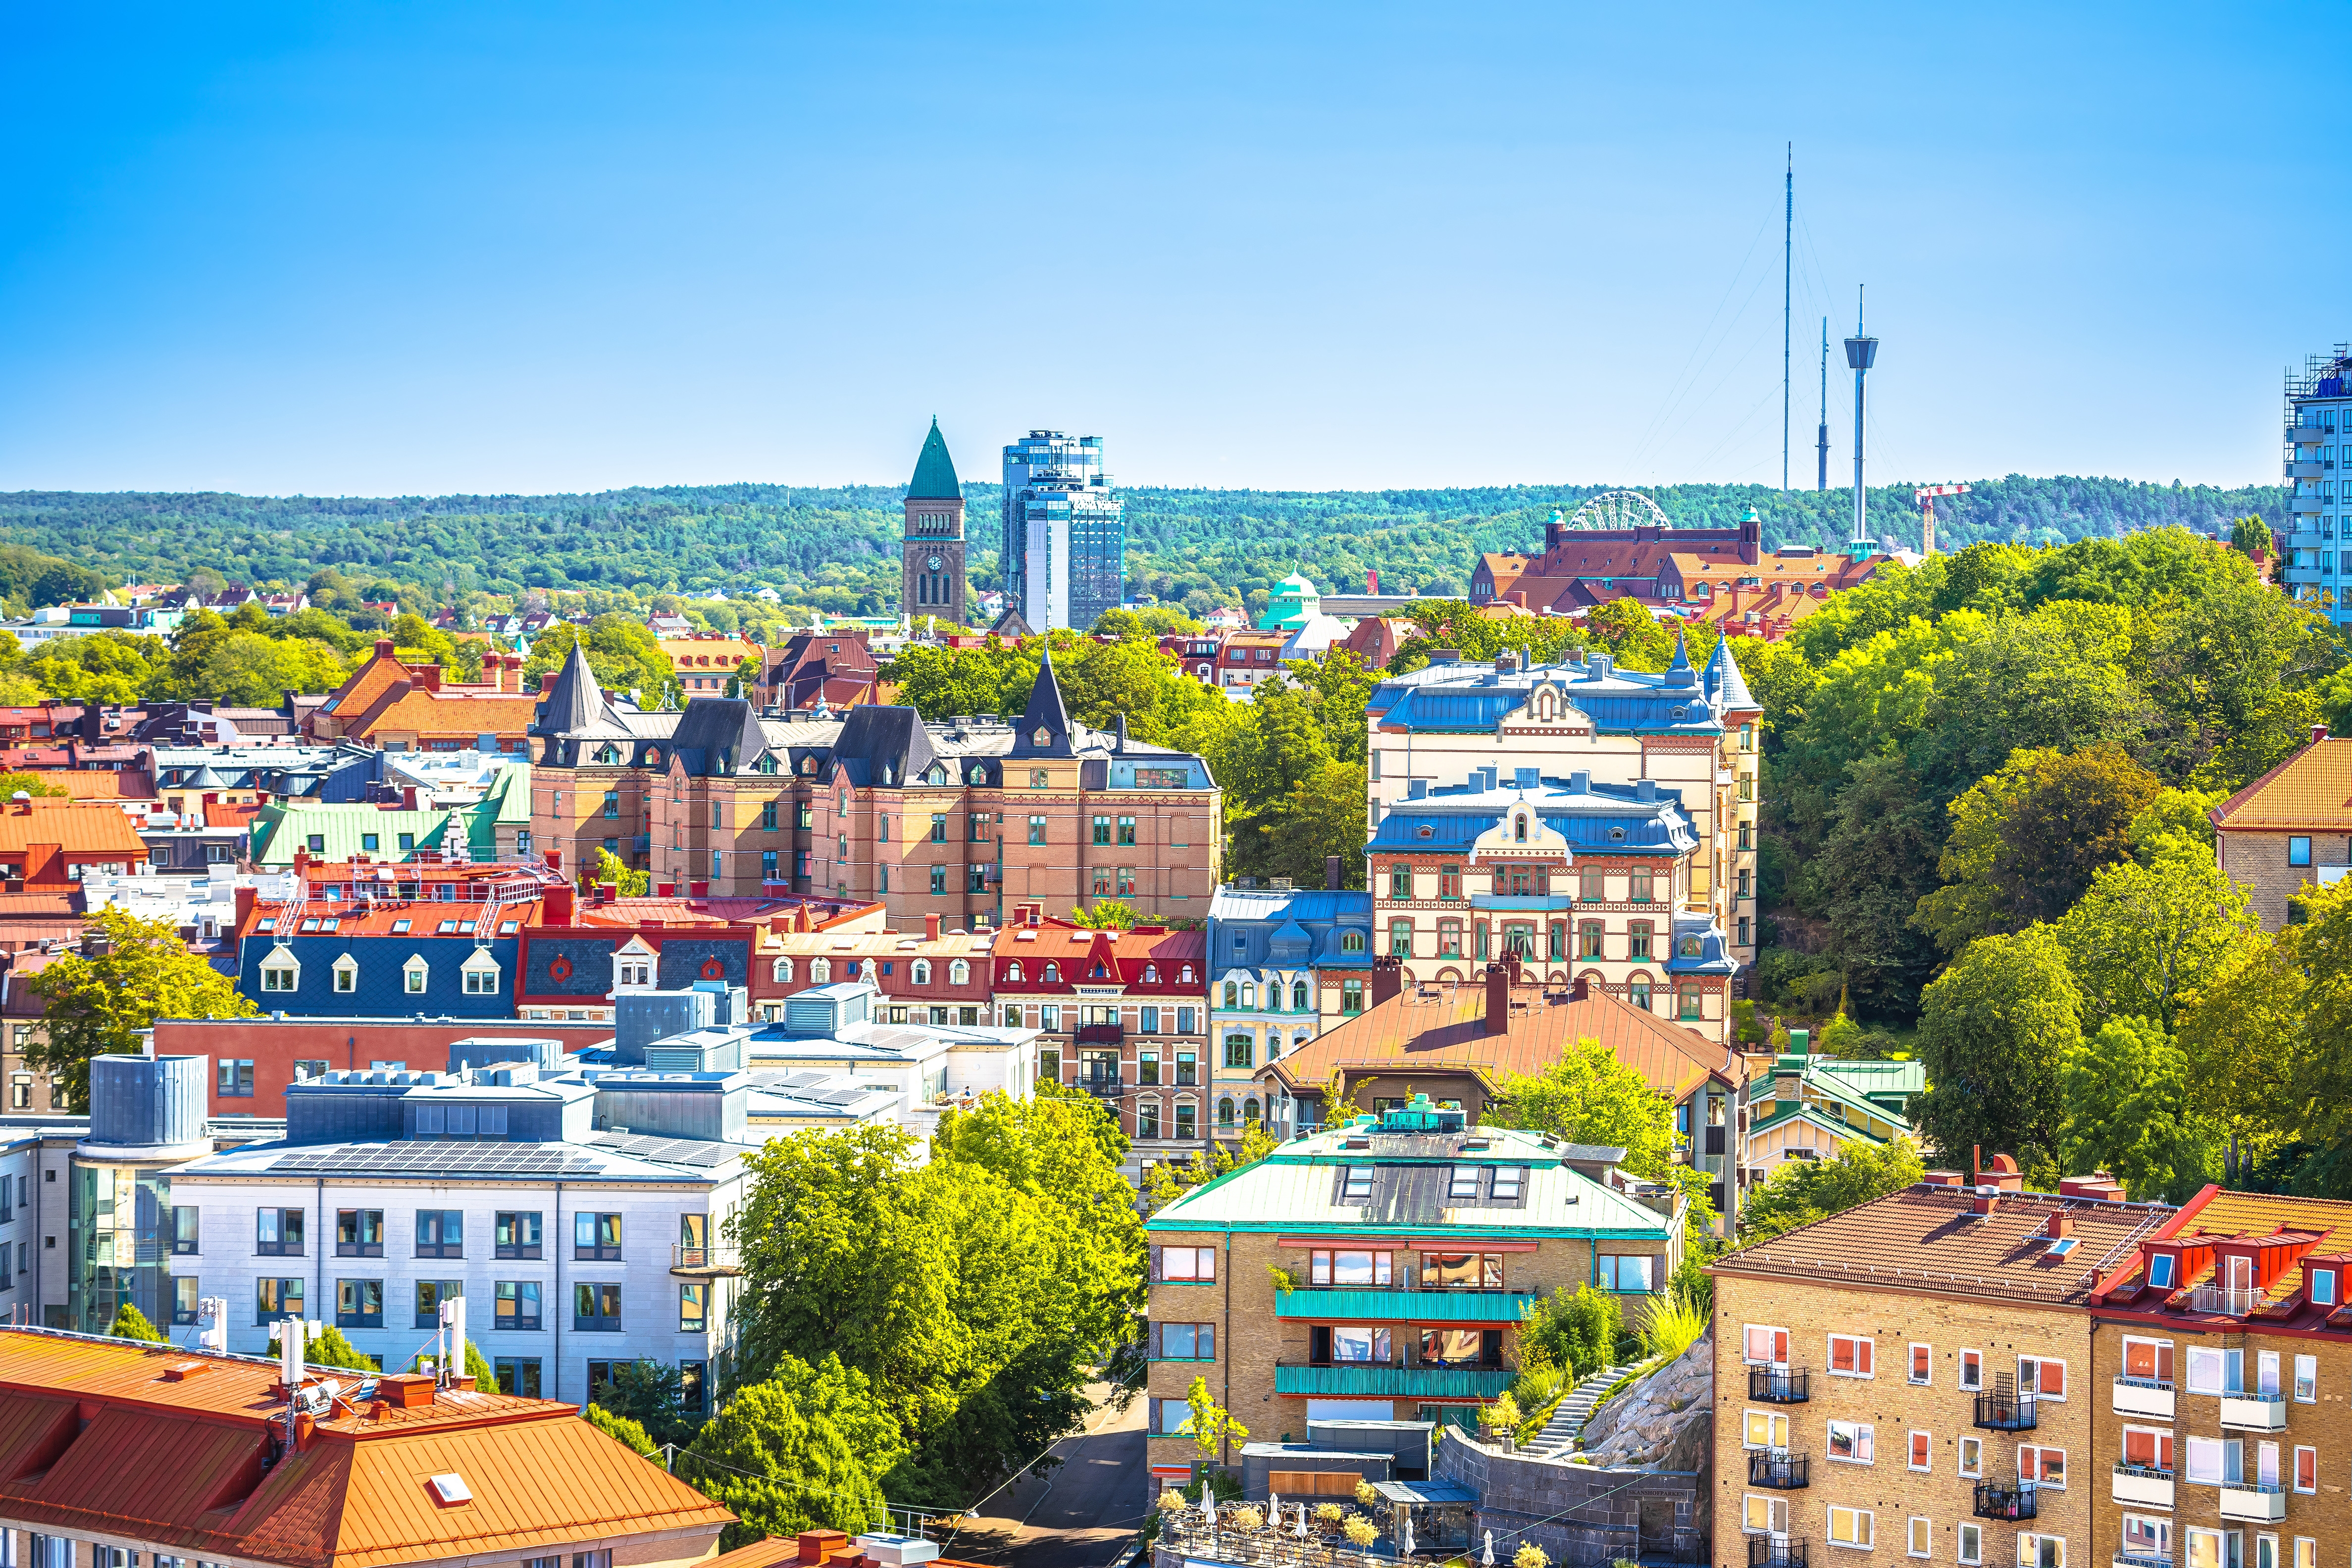 Sweden's permanent residence permit allows foreigners to live in a beautiful country